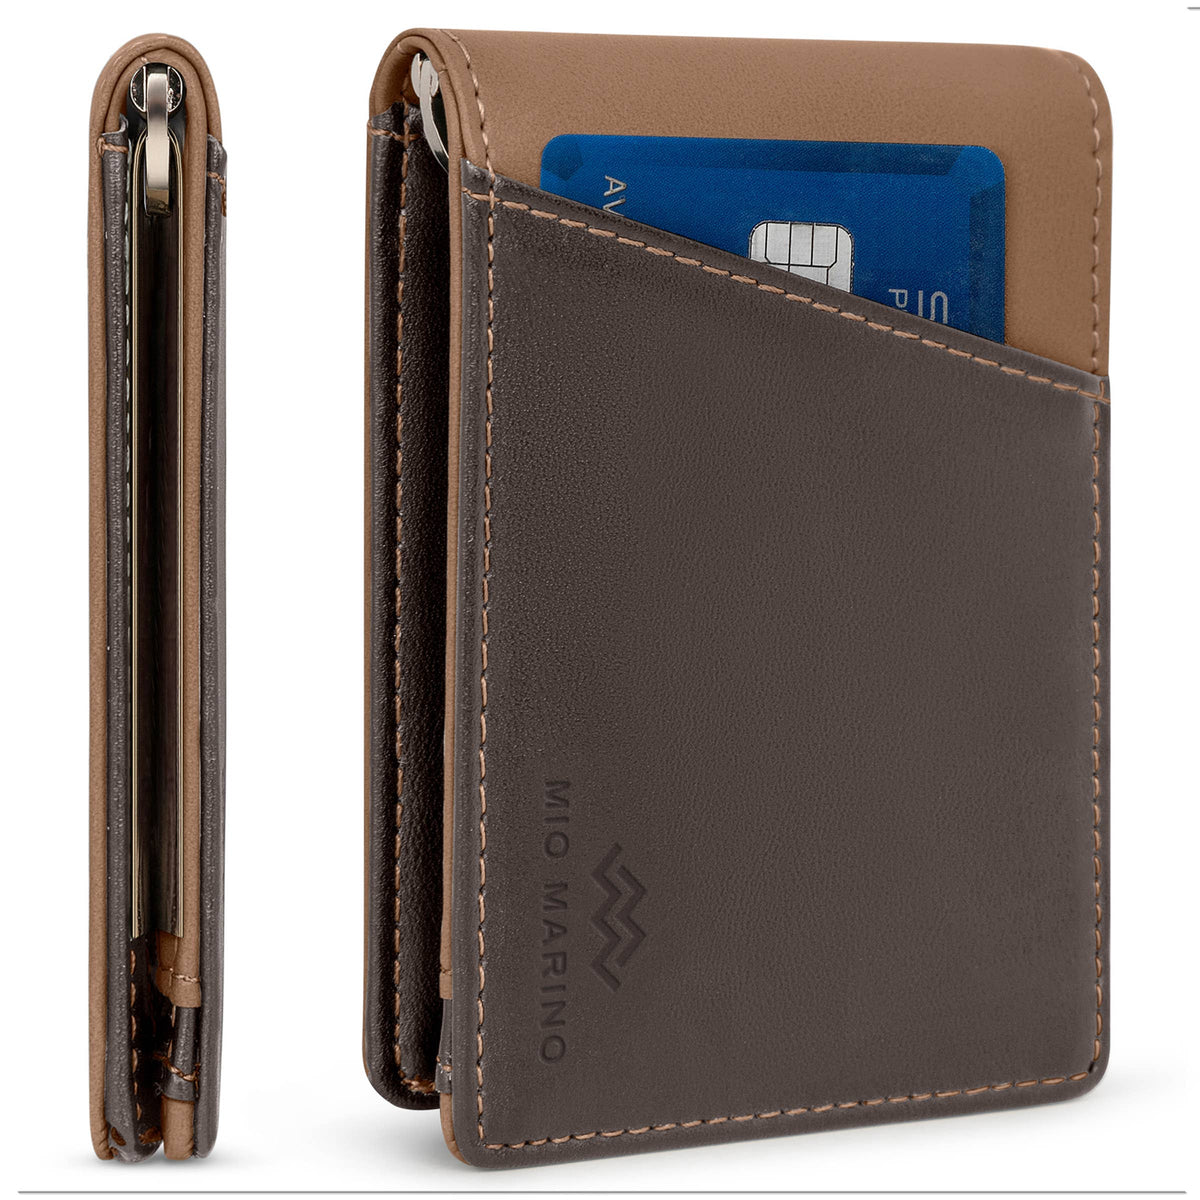 Mio Marino - Men's Slim Bifold Wallet with Quick Access Pull Tab: Carbon Black/Gray - WALLET - Synik Clothing - synikclothing.com